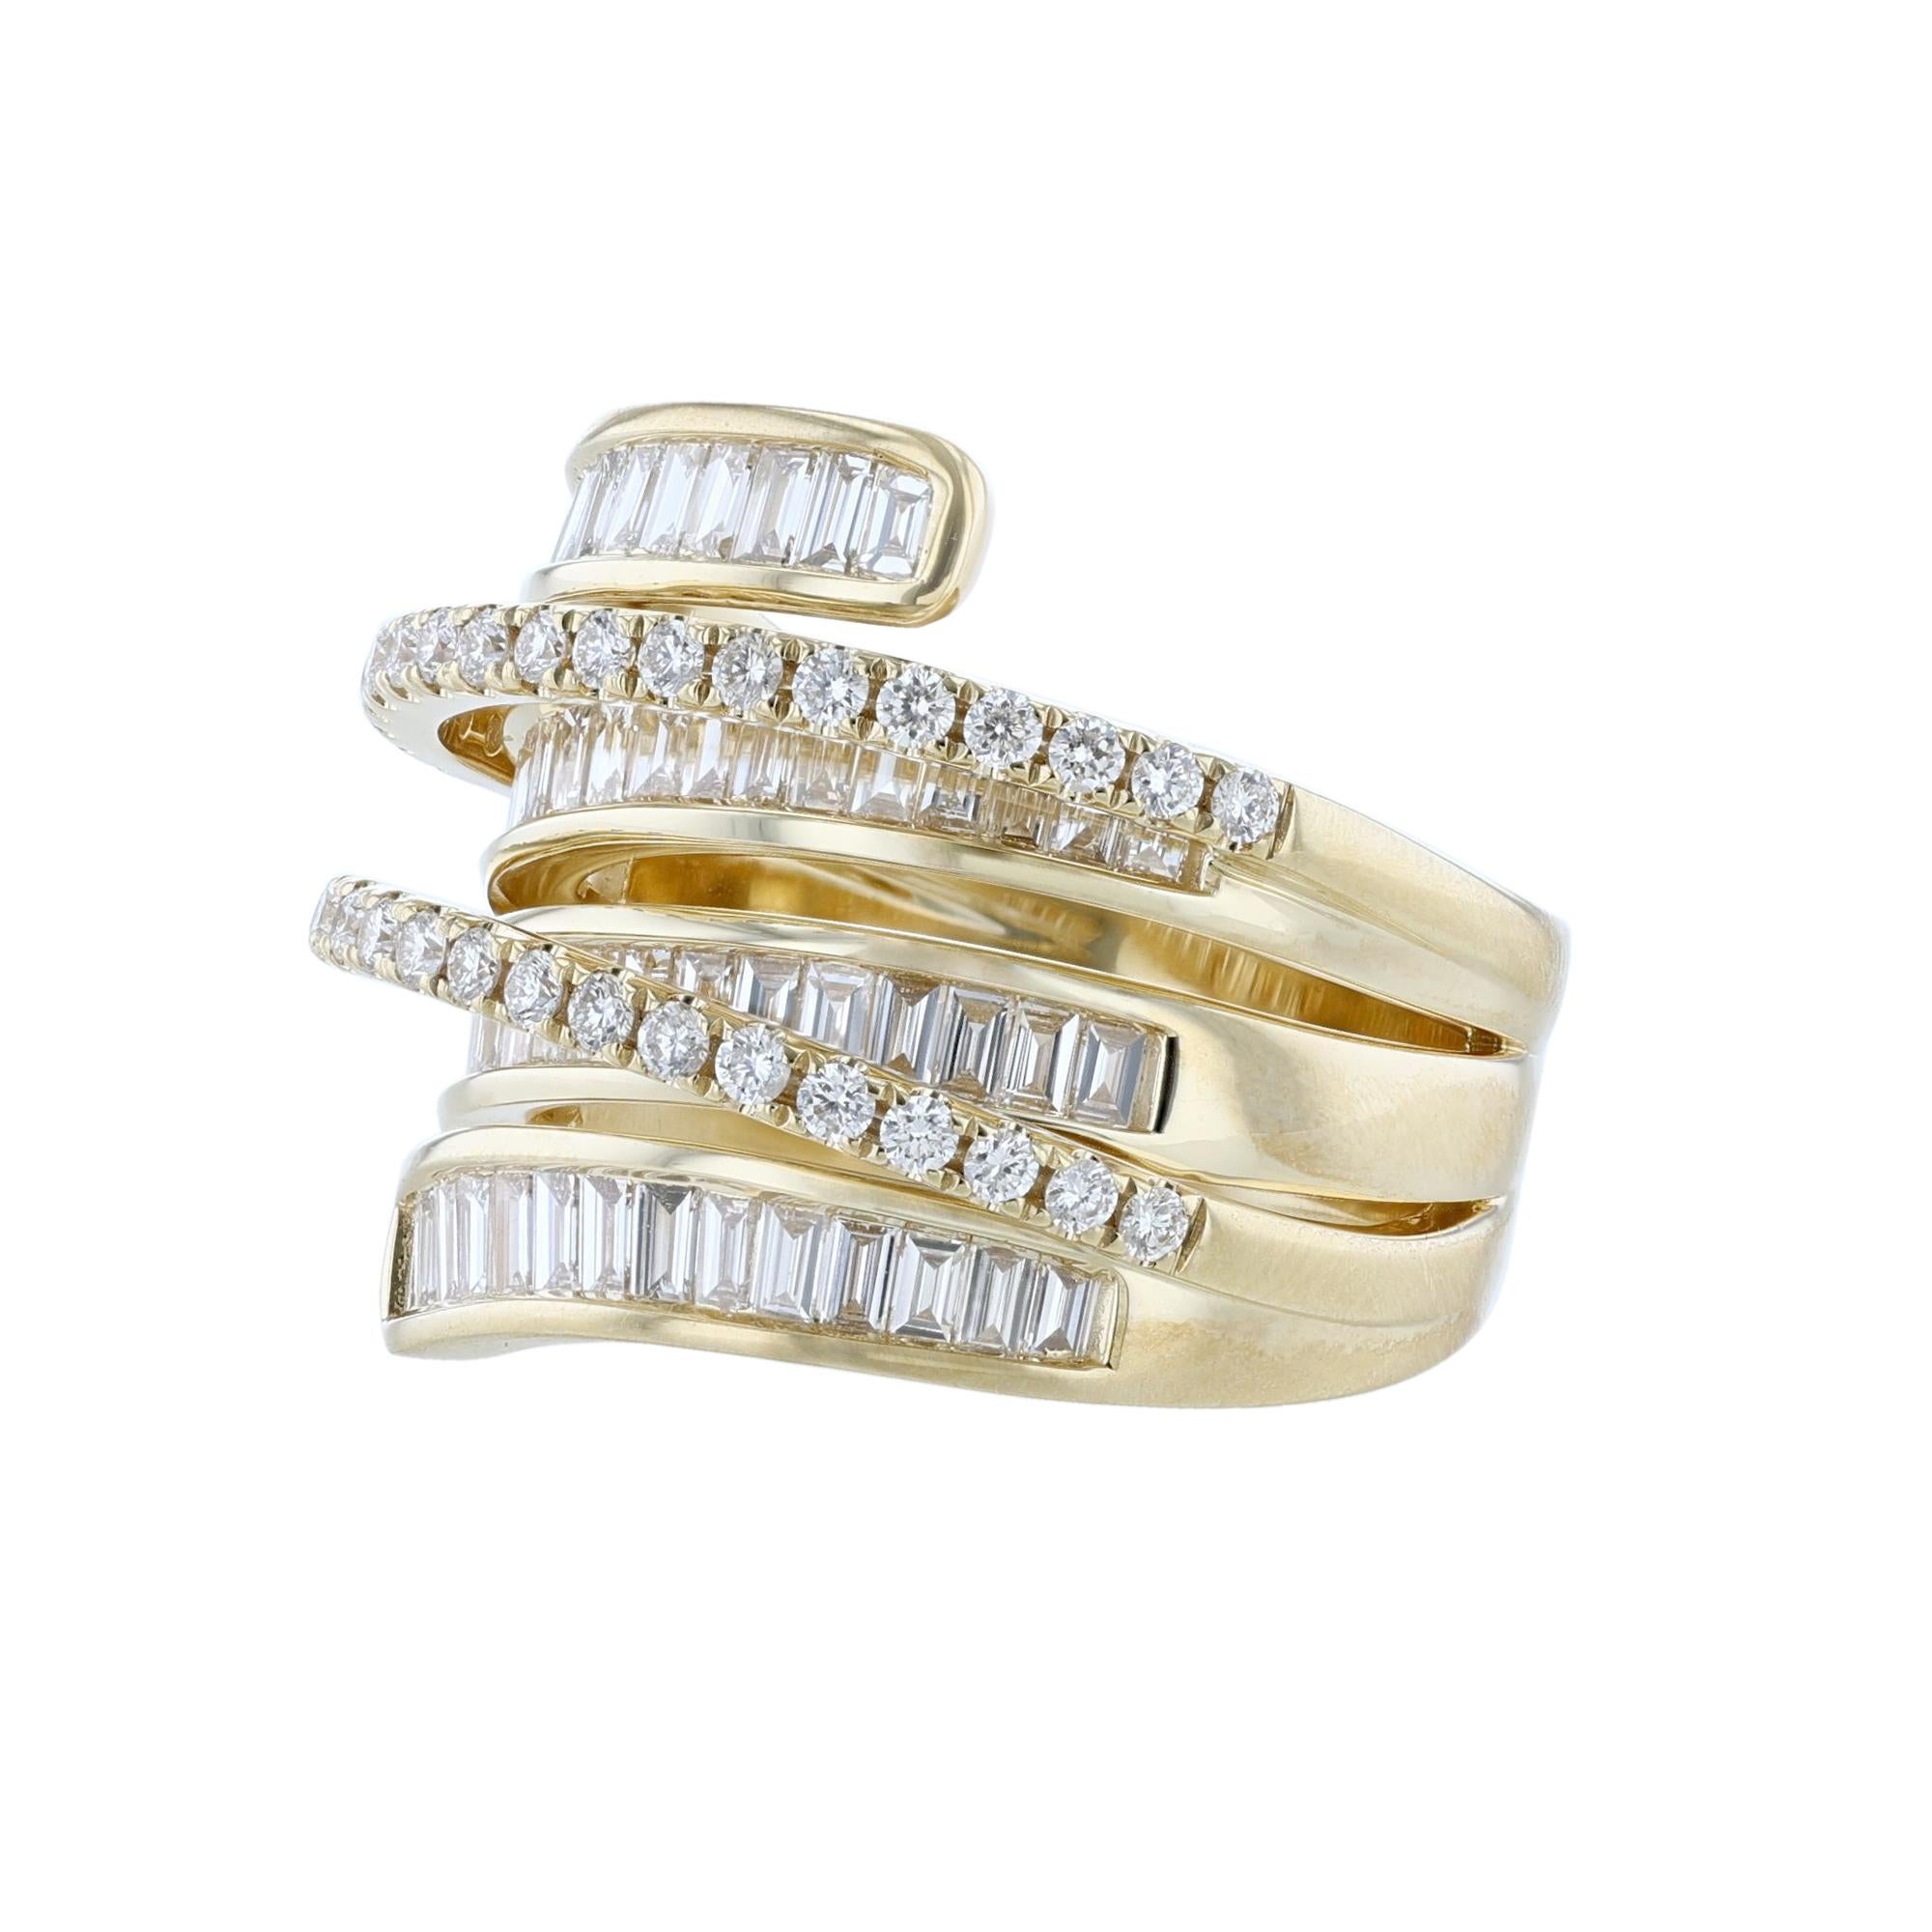 This ring is made in 18 Karat Yellow Gold. It features 40 round cut, prong set diamonds weighing 0.49 carats. Along with 62 tapered baguette cut, channel set diamonds weighing 1.39 carats. With a color grade (H) and clarity grade (SI2). 


